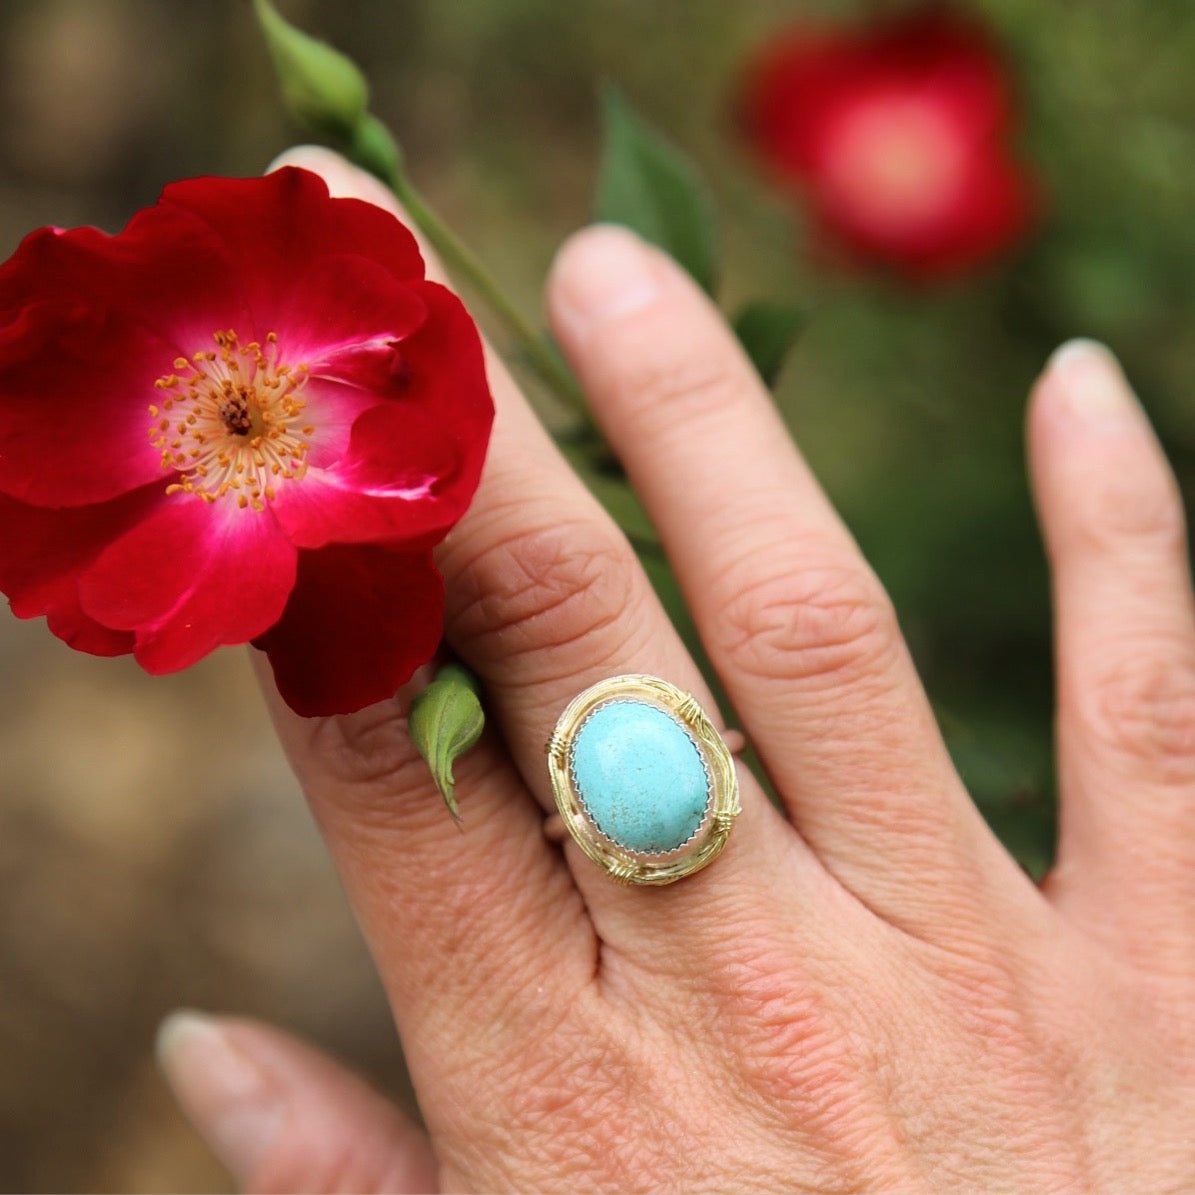 Turquoise "Bird's Nest" Handmade Ring in 18k Gold and Sterling Silver with Smooth Band